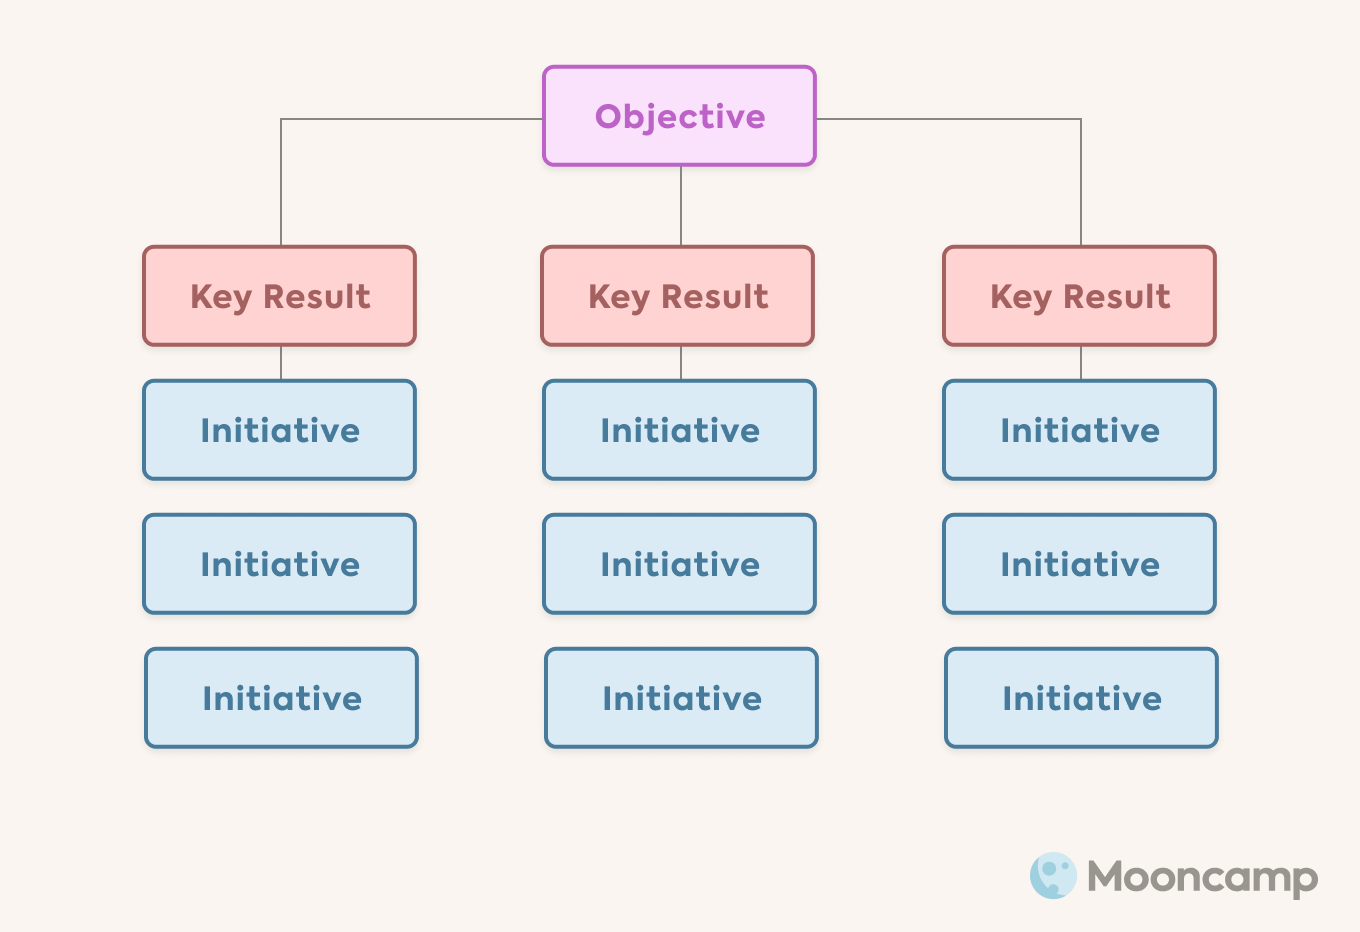 Objectives, Key Results, and initiatives